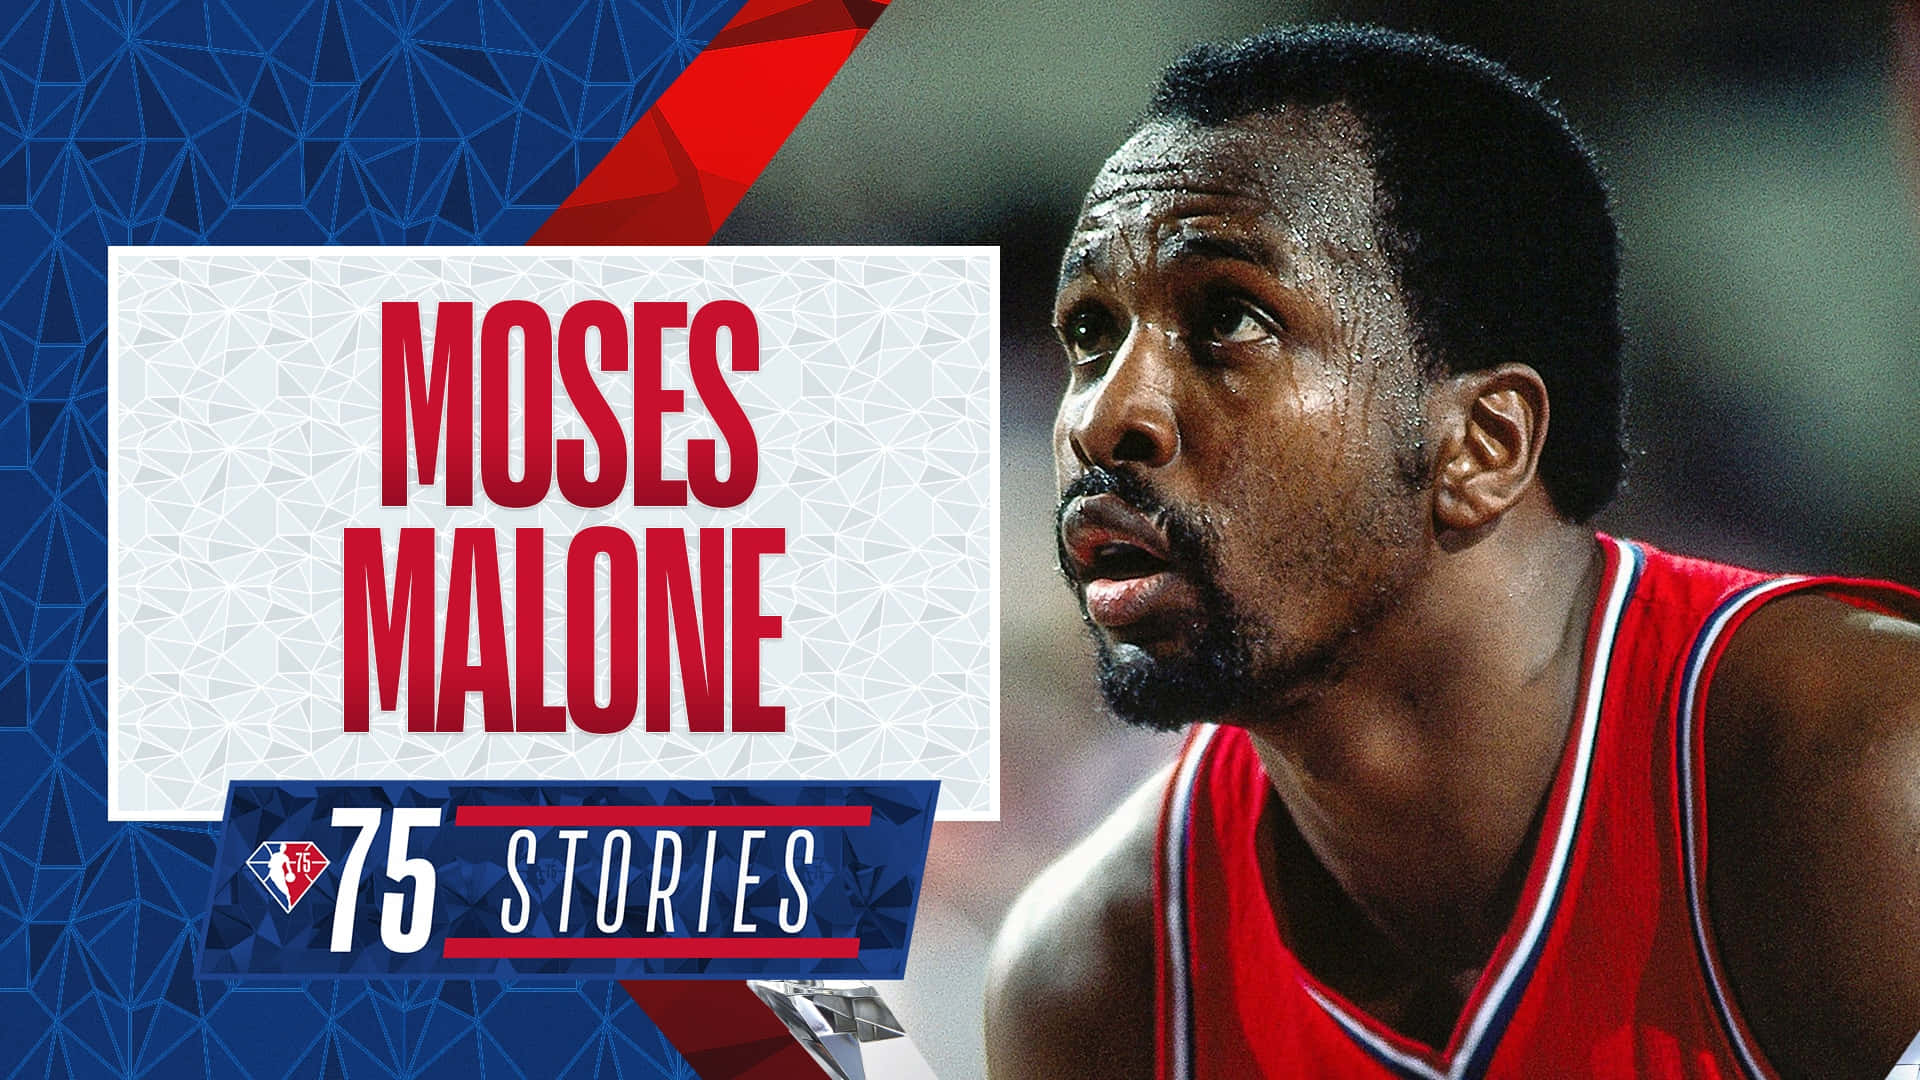 Moses Malone 75 Stories Wallpaper